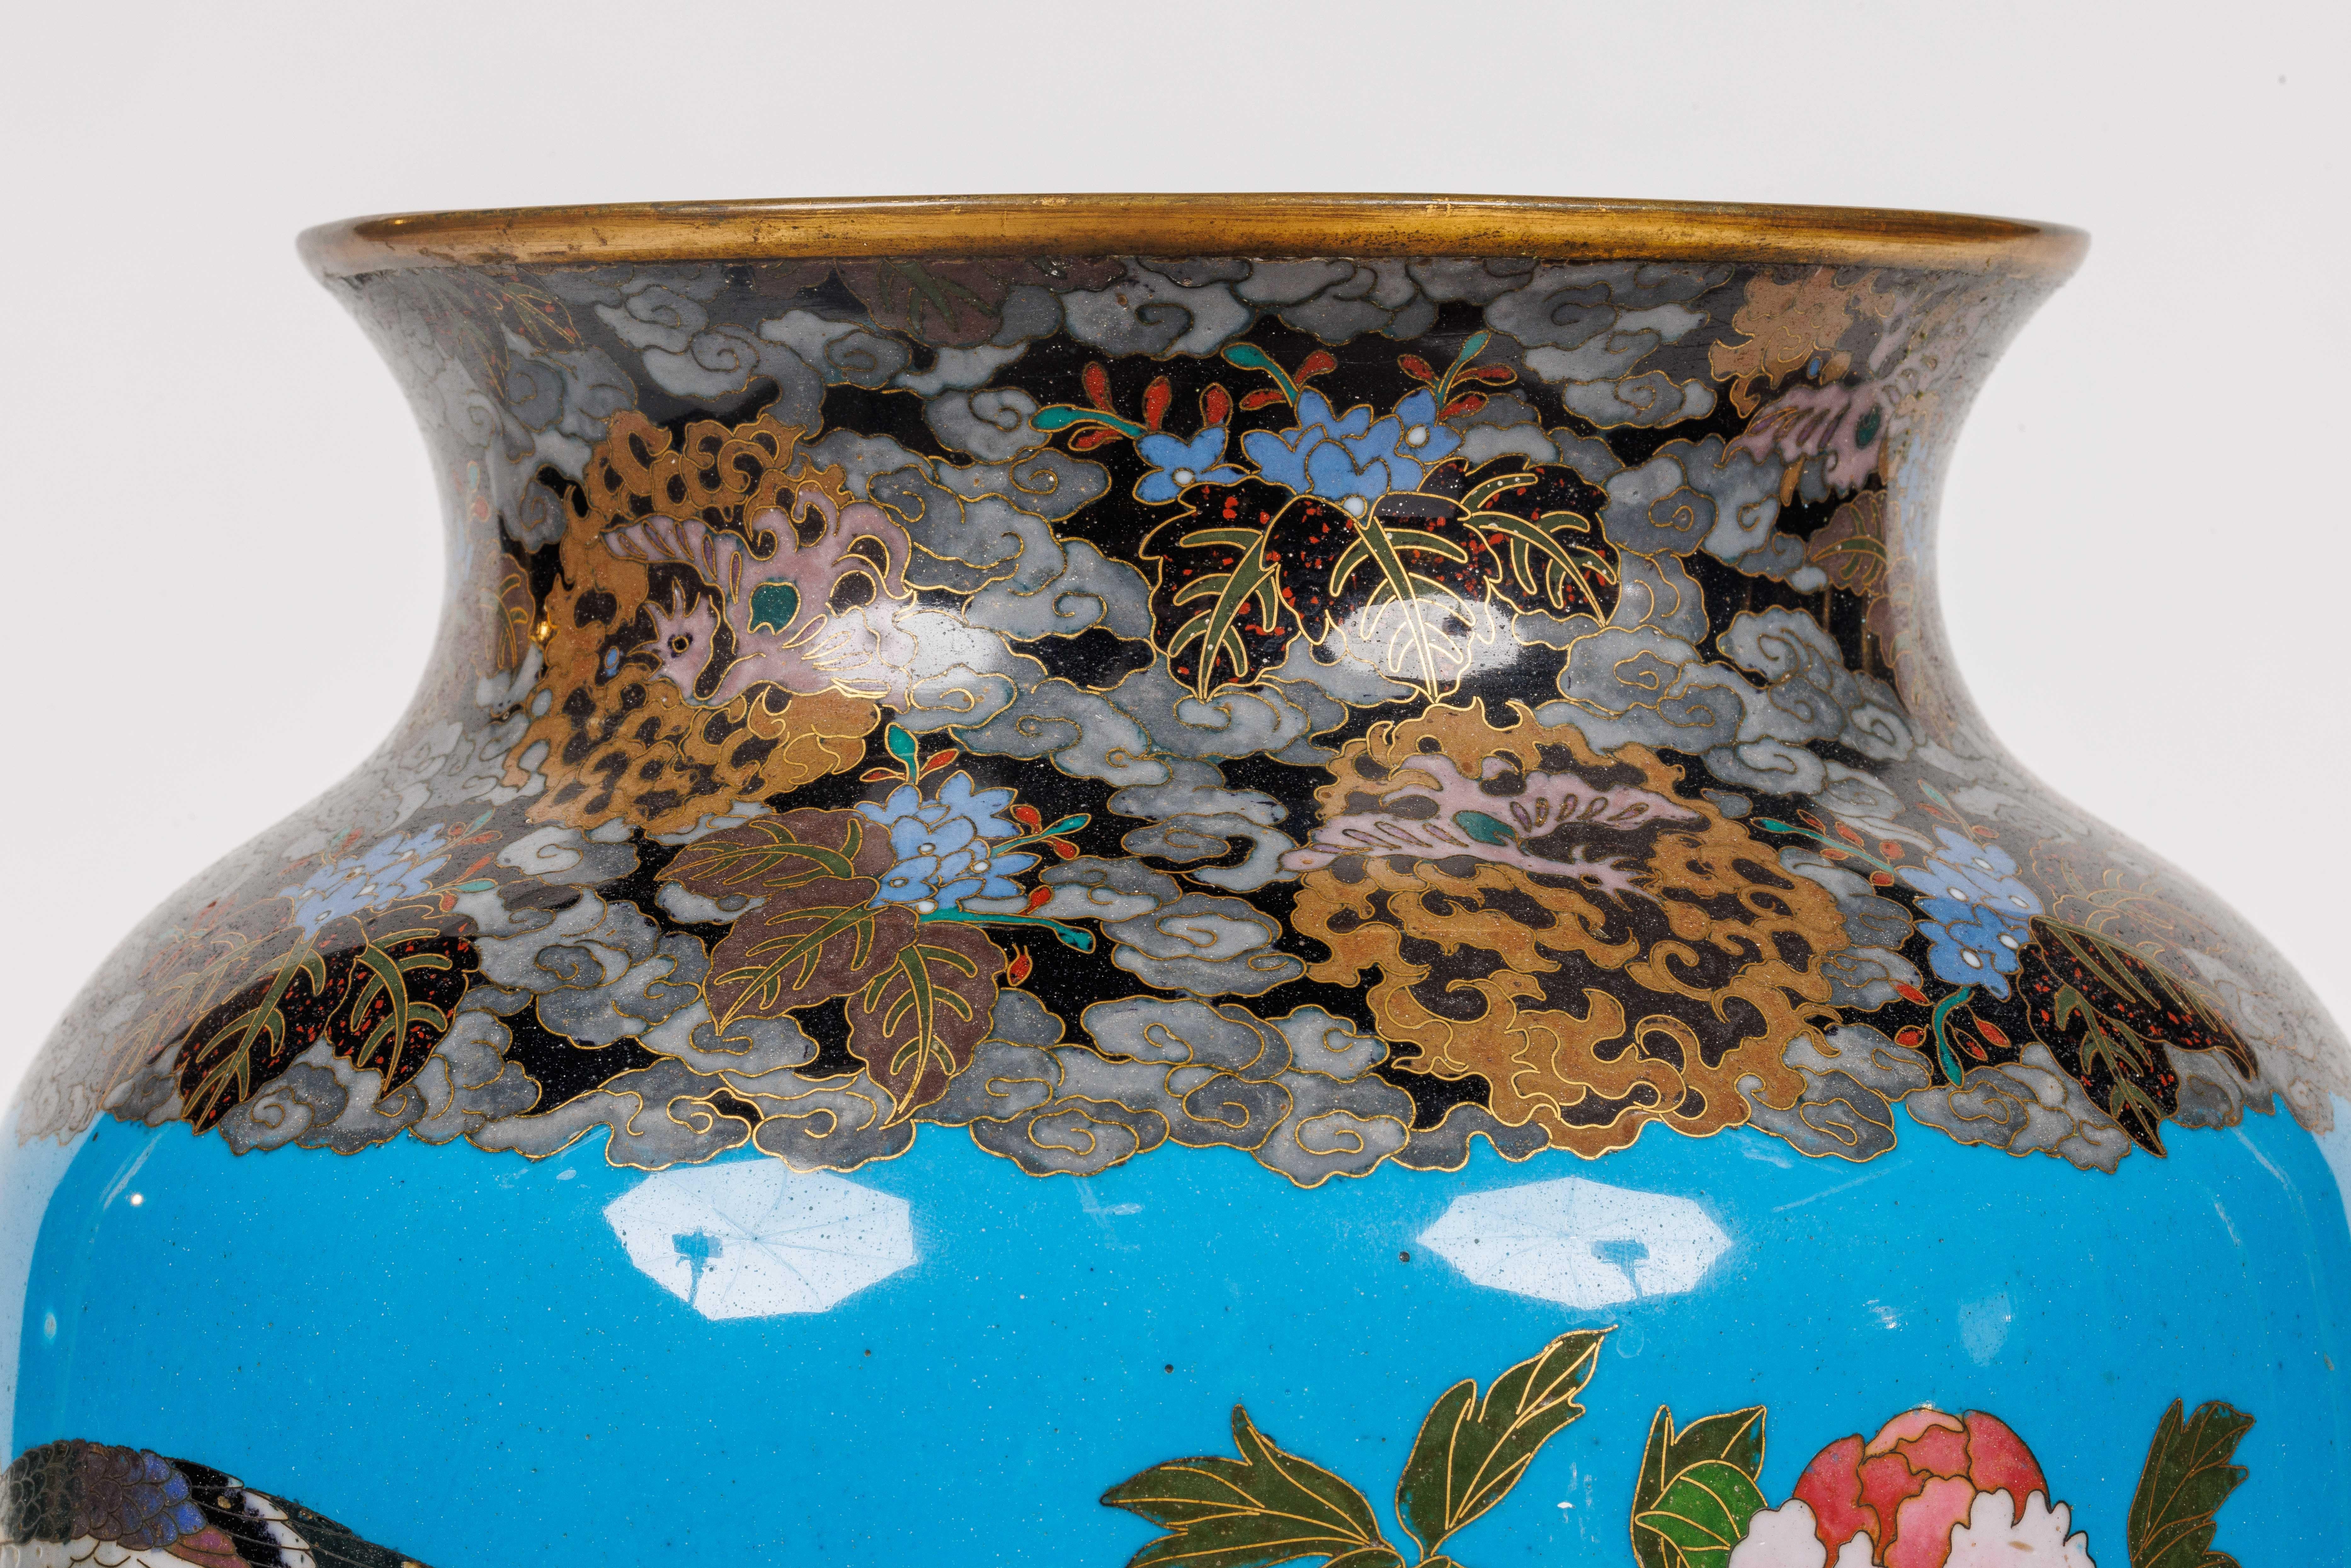 Large Pair of Meiji Period Japanese Cloisonne Enamel Vases Attributed to Goto For Sale 12